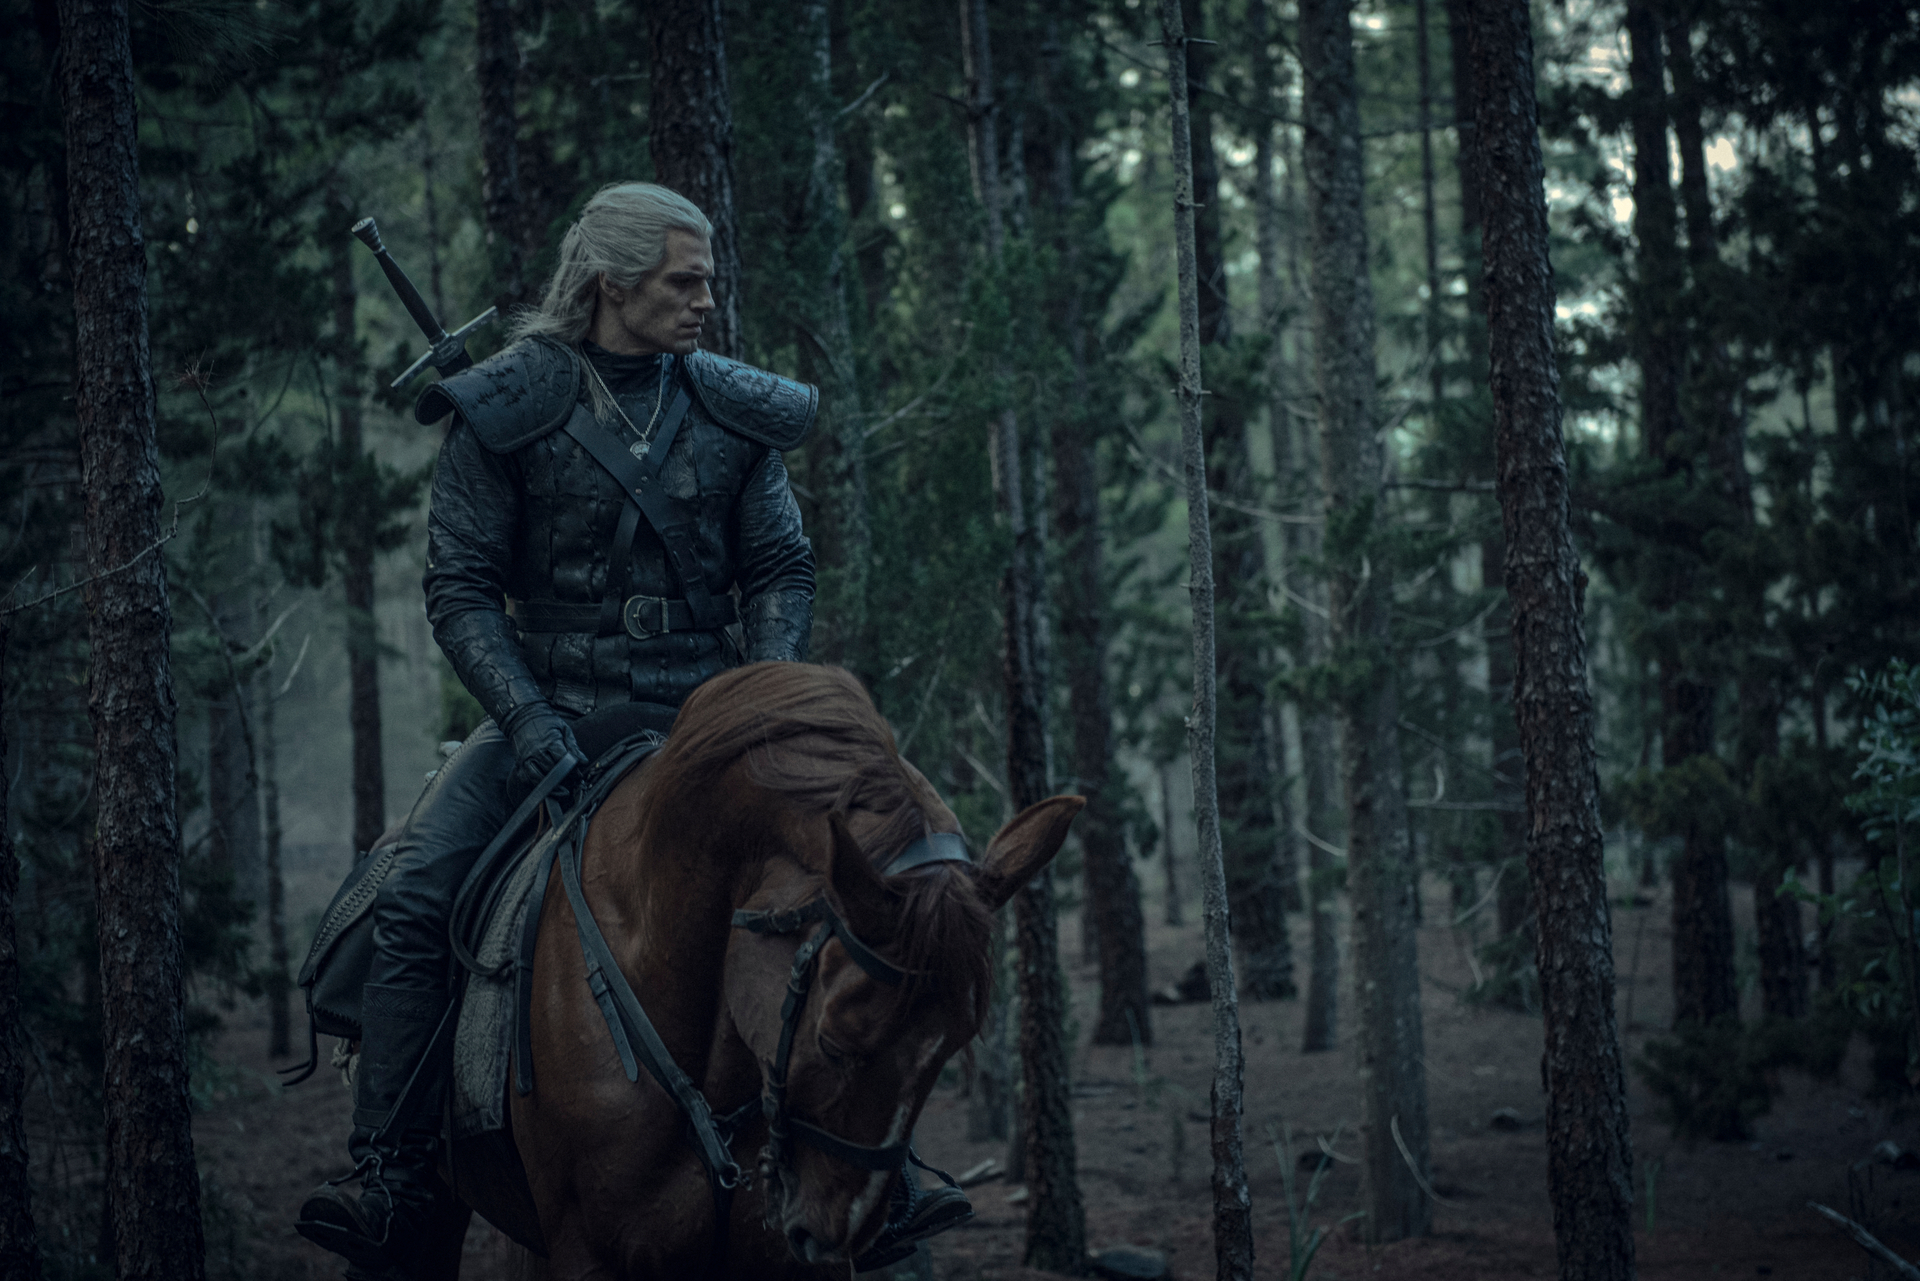 The Witcher Geralt Of Rivia Though The Woods Production Still